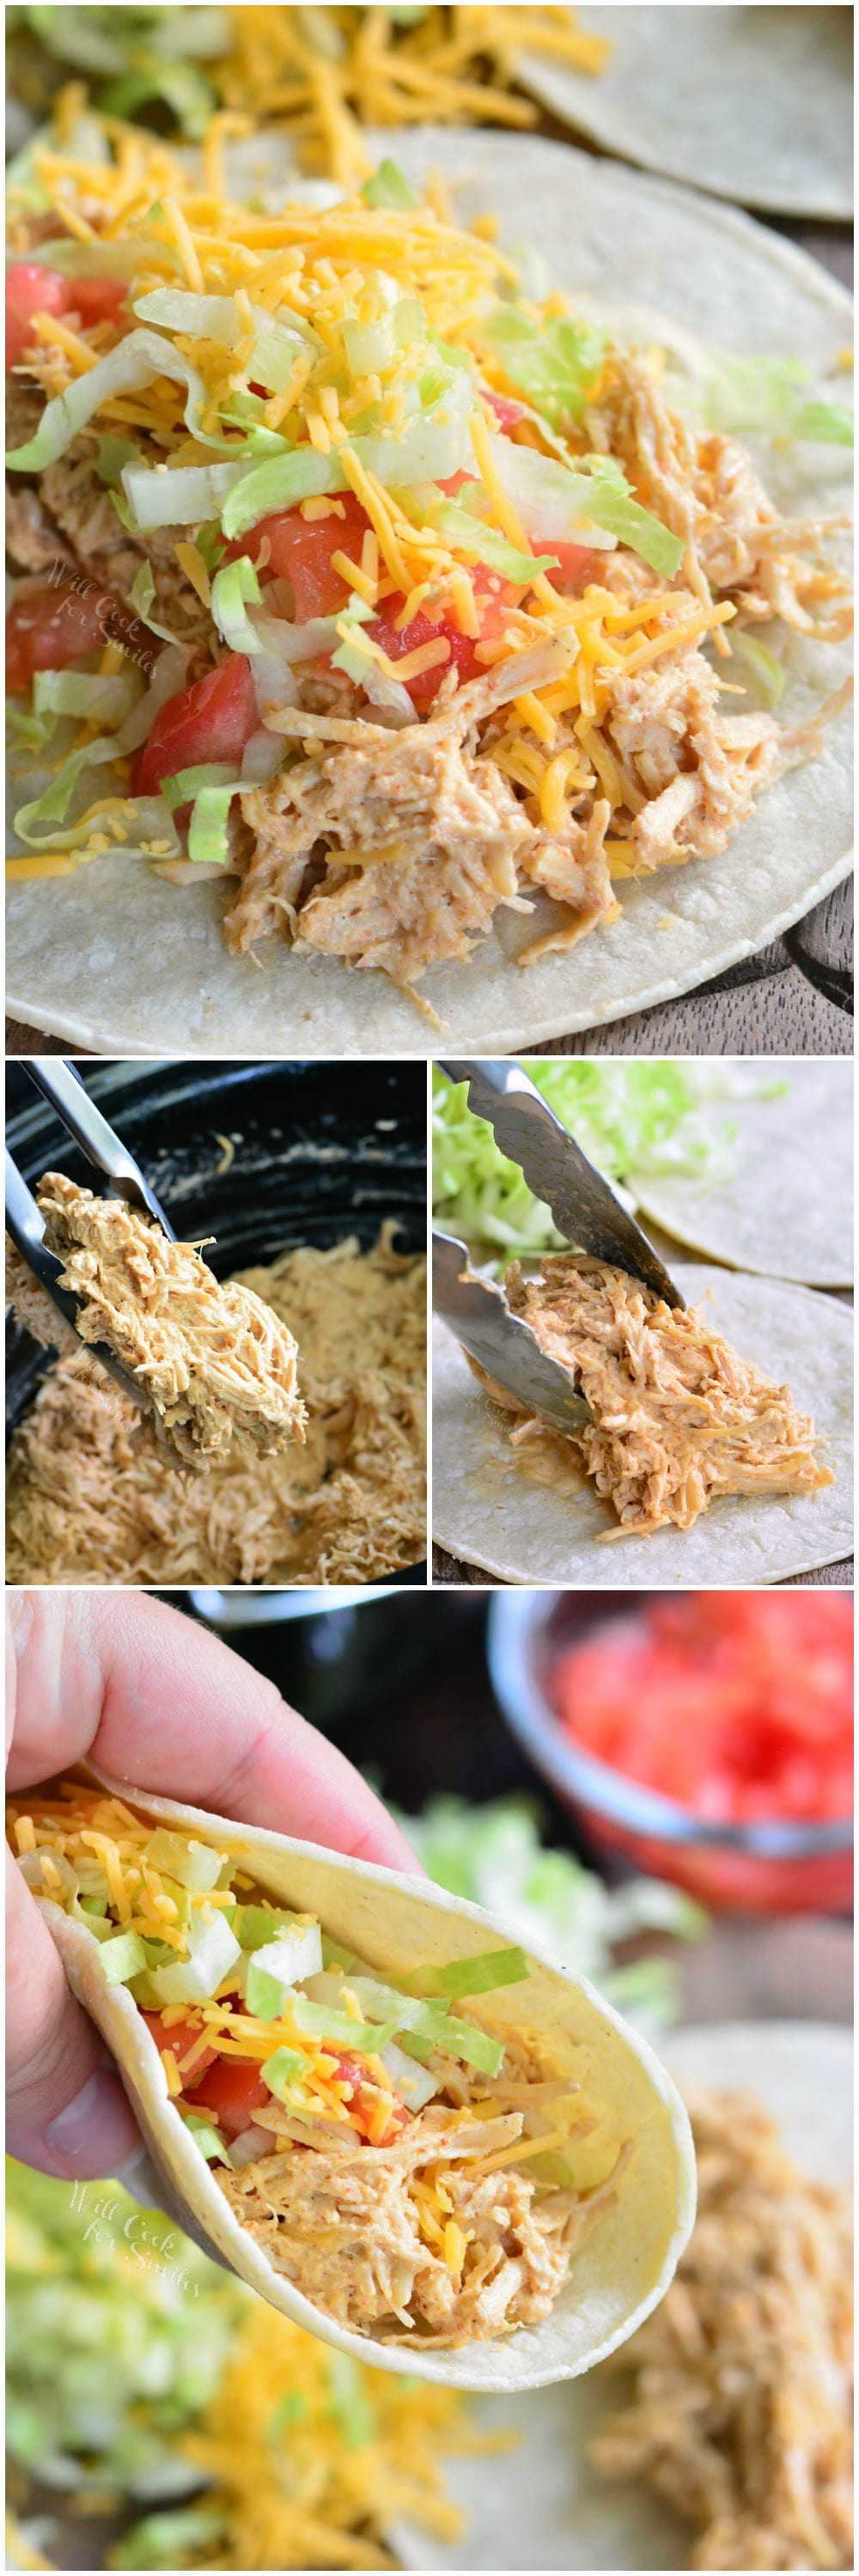 Collage of chicken taco steps.